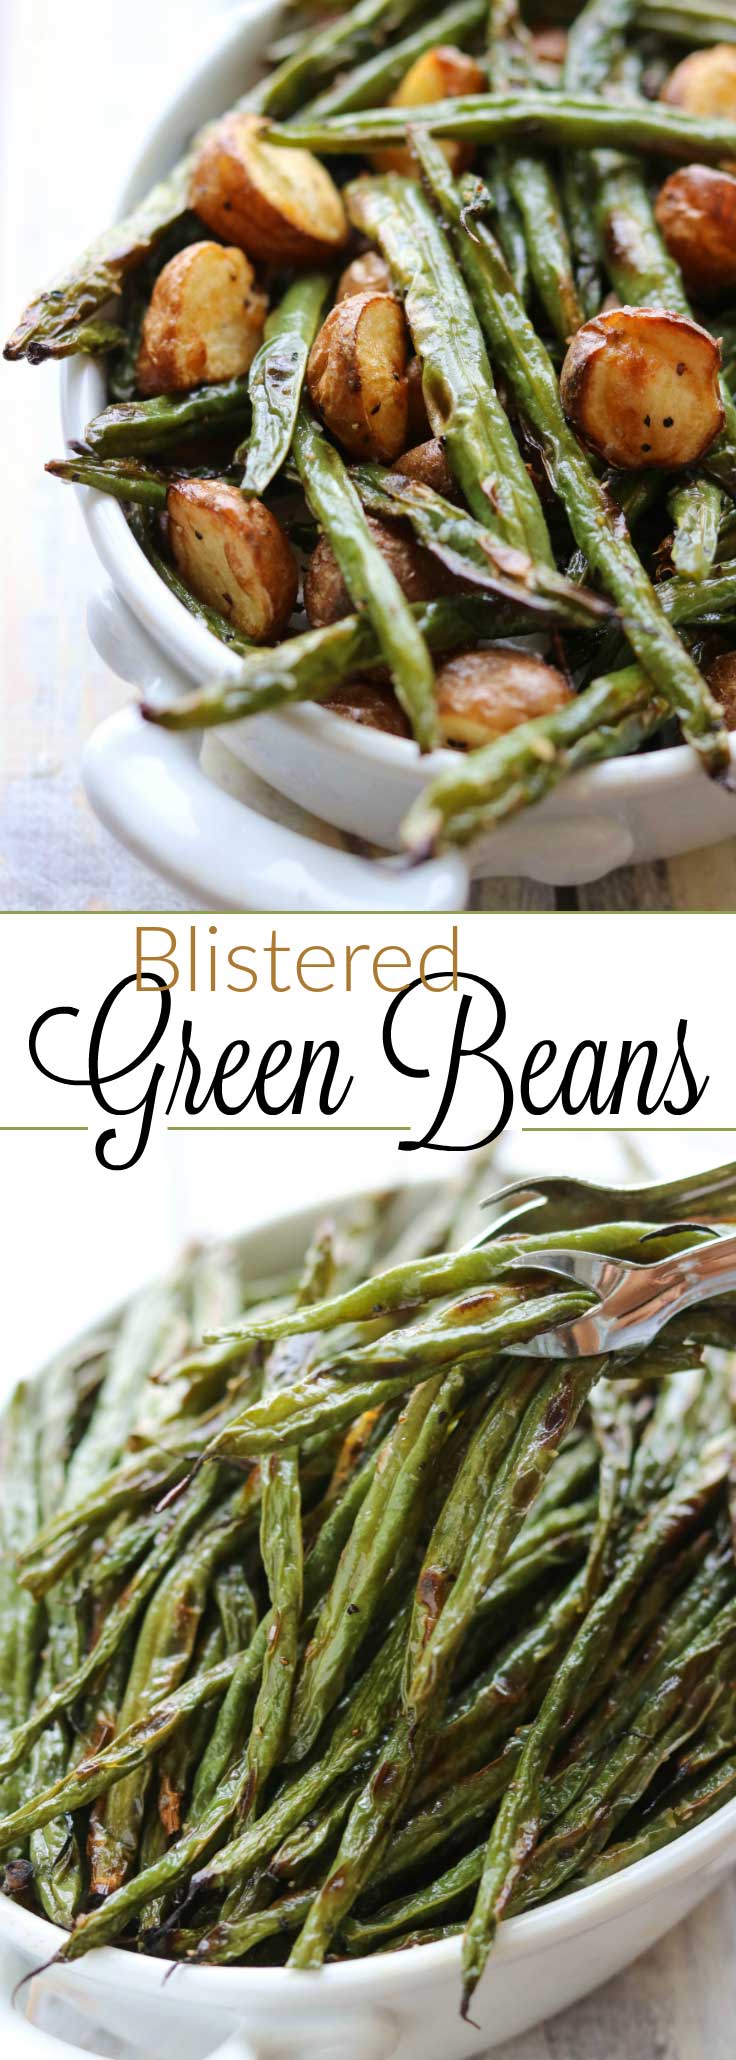 One simple ingredient … amazing results! An easy technique that yields maximum flavor! These Blistered Green Beans are the ultimate in simplicity, yet they're incredibly delicious, with deep, caramelized flavors thanks to the magic of oven-roasting. Blistered, oven-roasted green beans are delicious as an easy side dish for practically any meal, and they’re so adaptable, too! Be warned: these roasted green beans disappear FAST, so you’d better make a double batch! | www.TwoHealthyKitchens.com